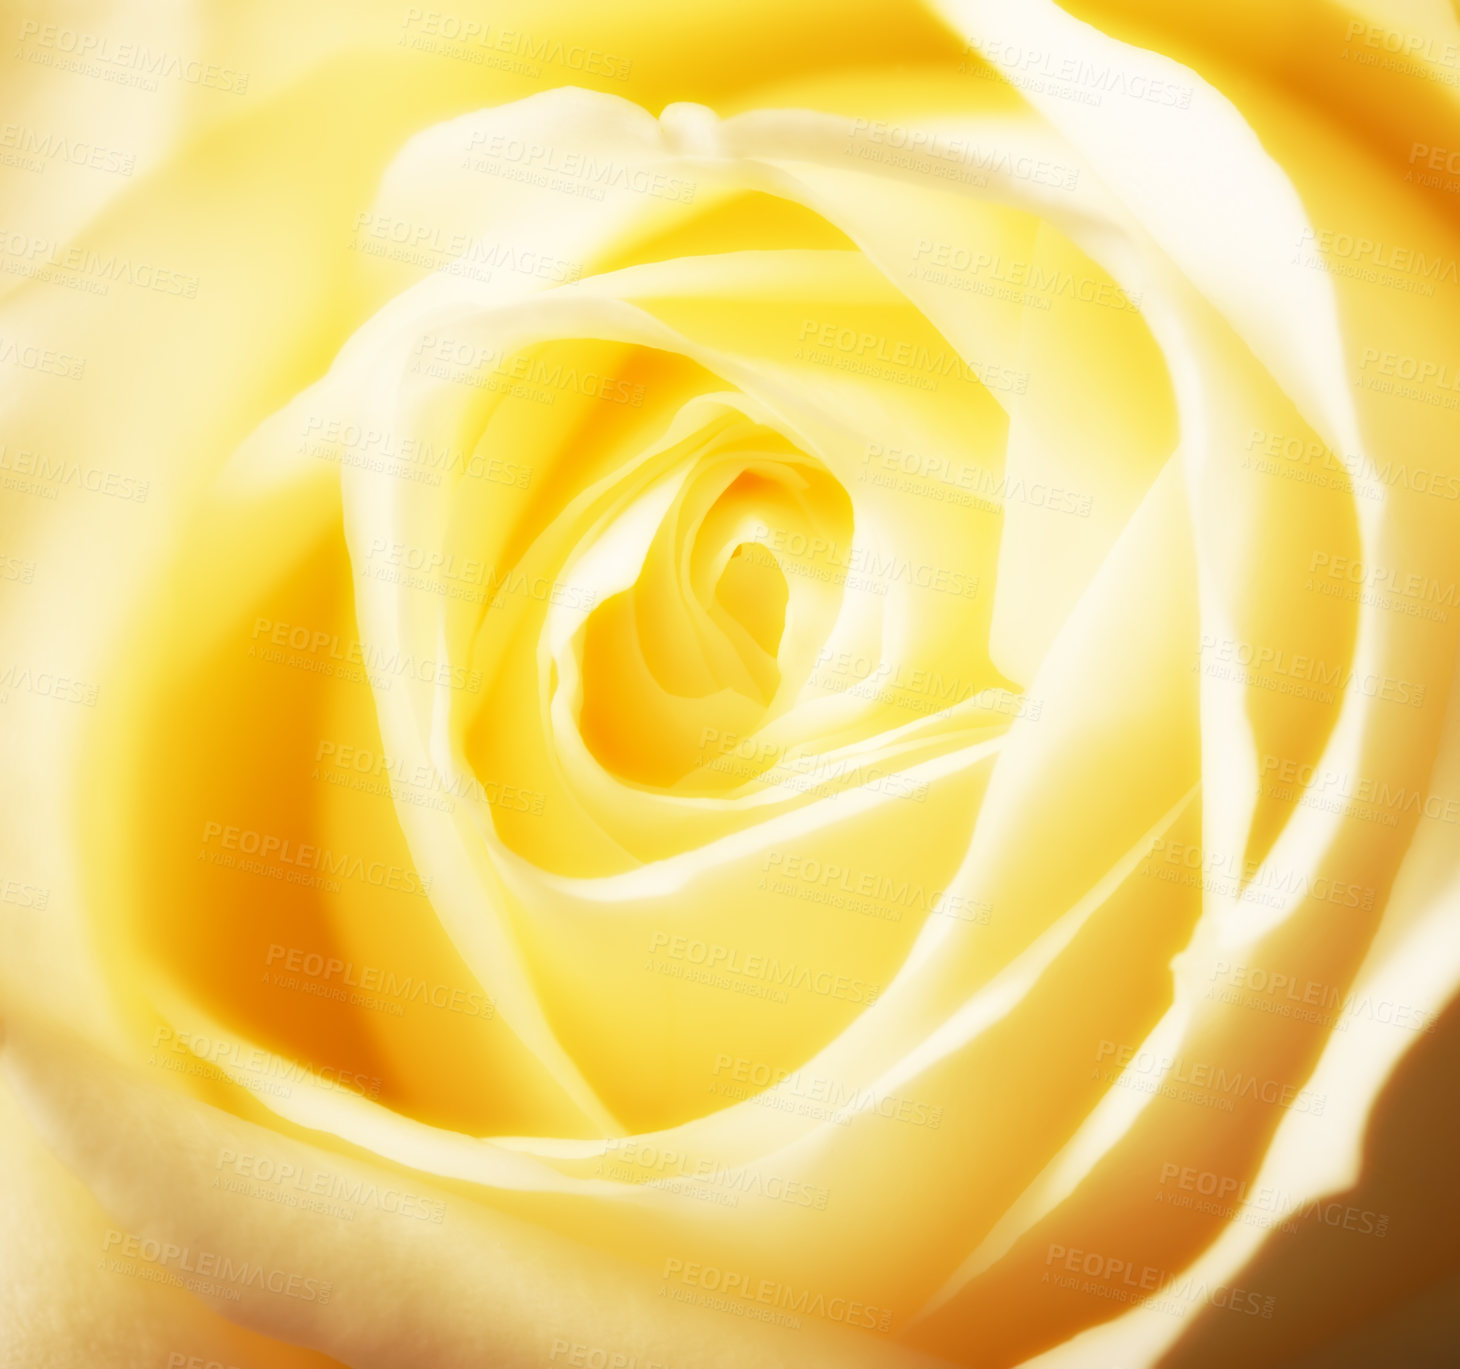 Buy stock photo A close-up photo of a yellow rose